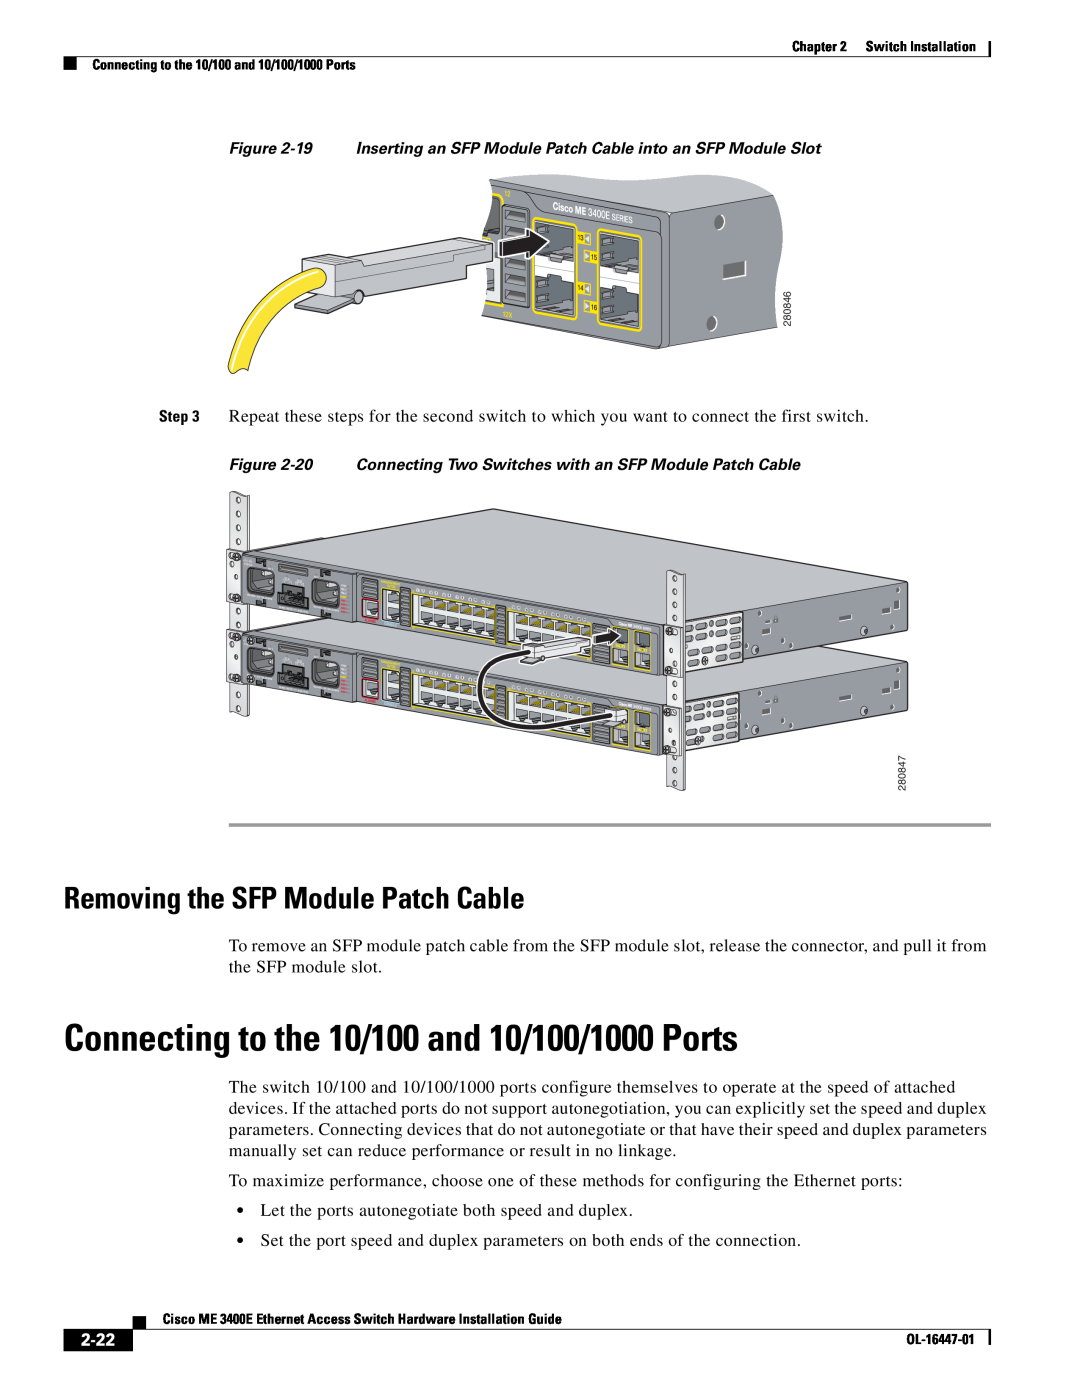 Cisco Systems OL-16447-01 manual Connecting to the 10/100 and 10/100/1000 Ports, Removing the SFP Module Patch Cable, 2-22 